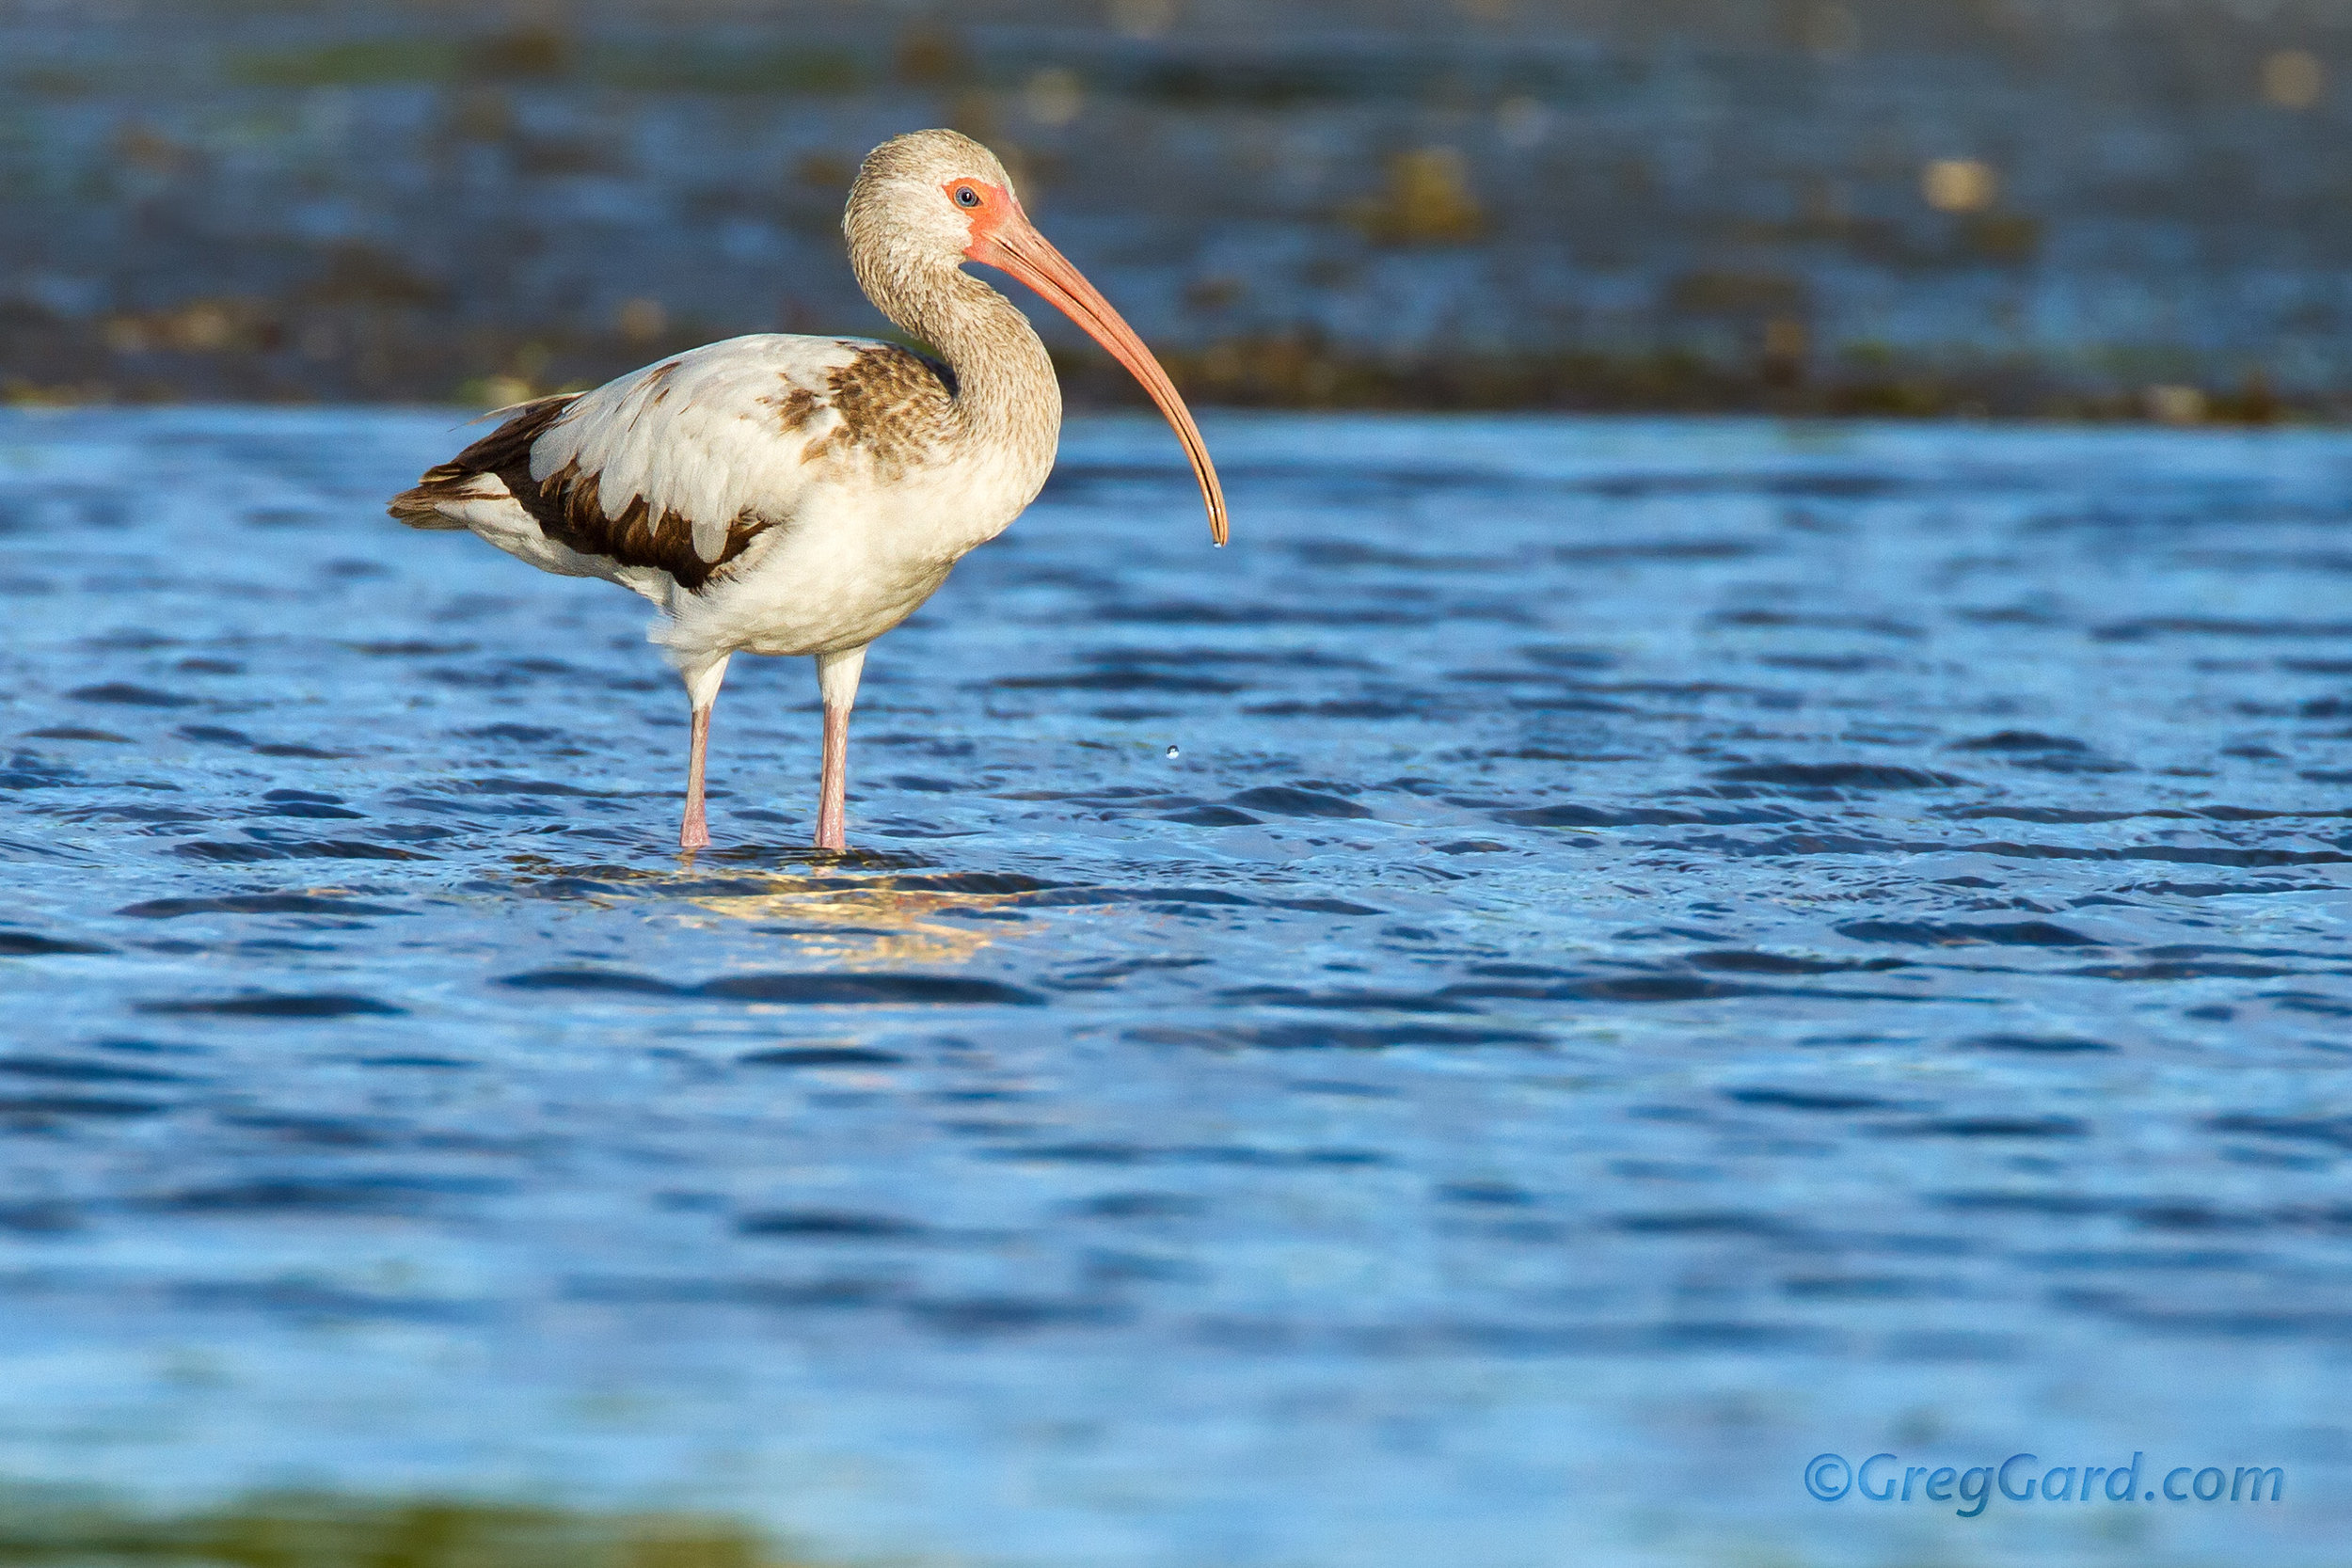 Juvenile White Ibis standing in shallow water